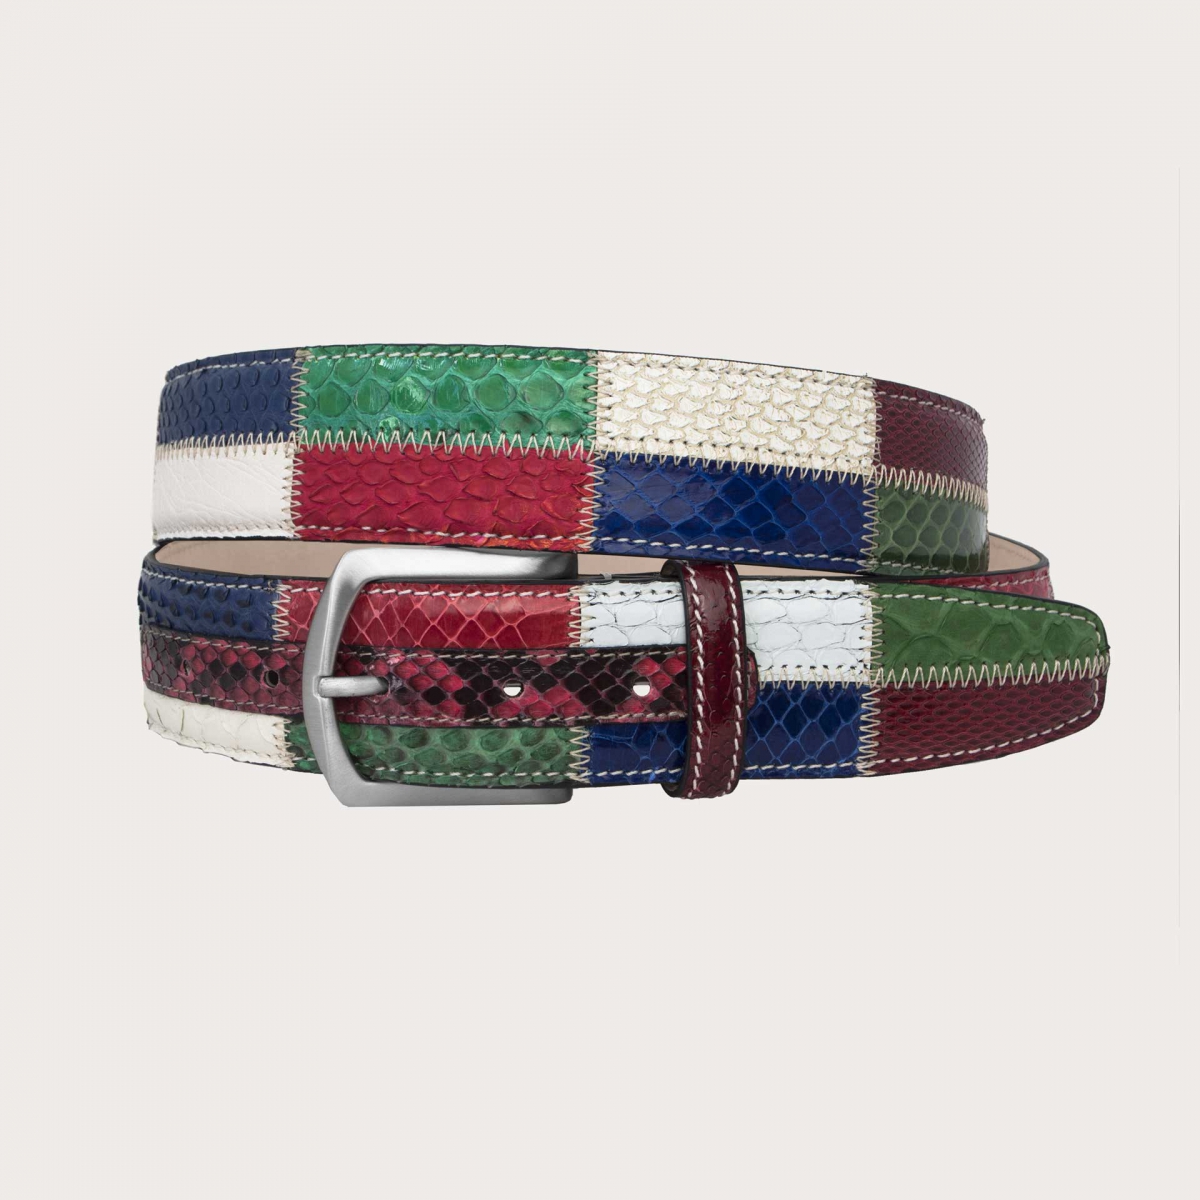 Casual patchwork python belt, red blue white green